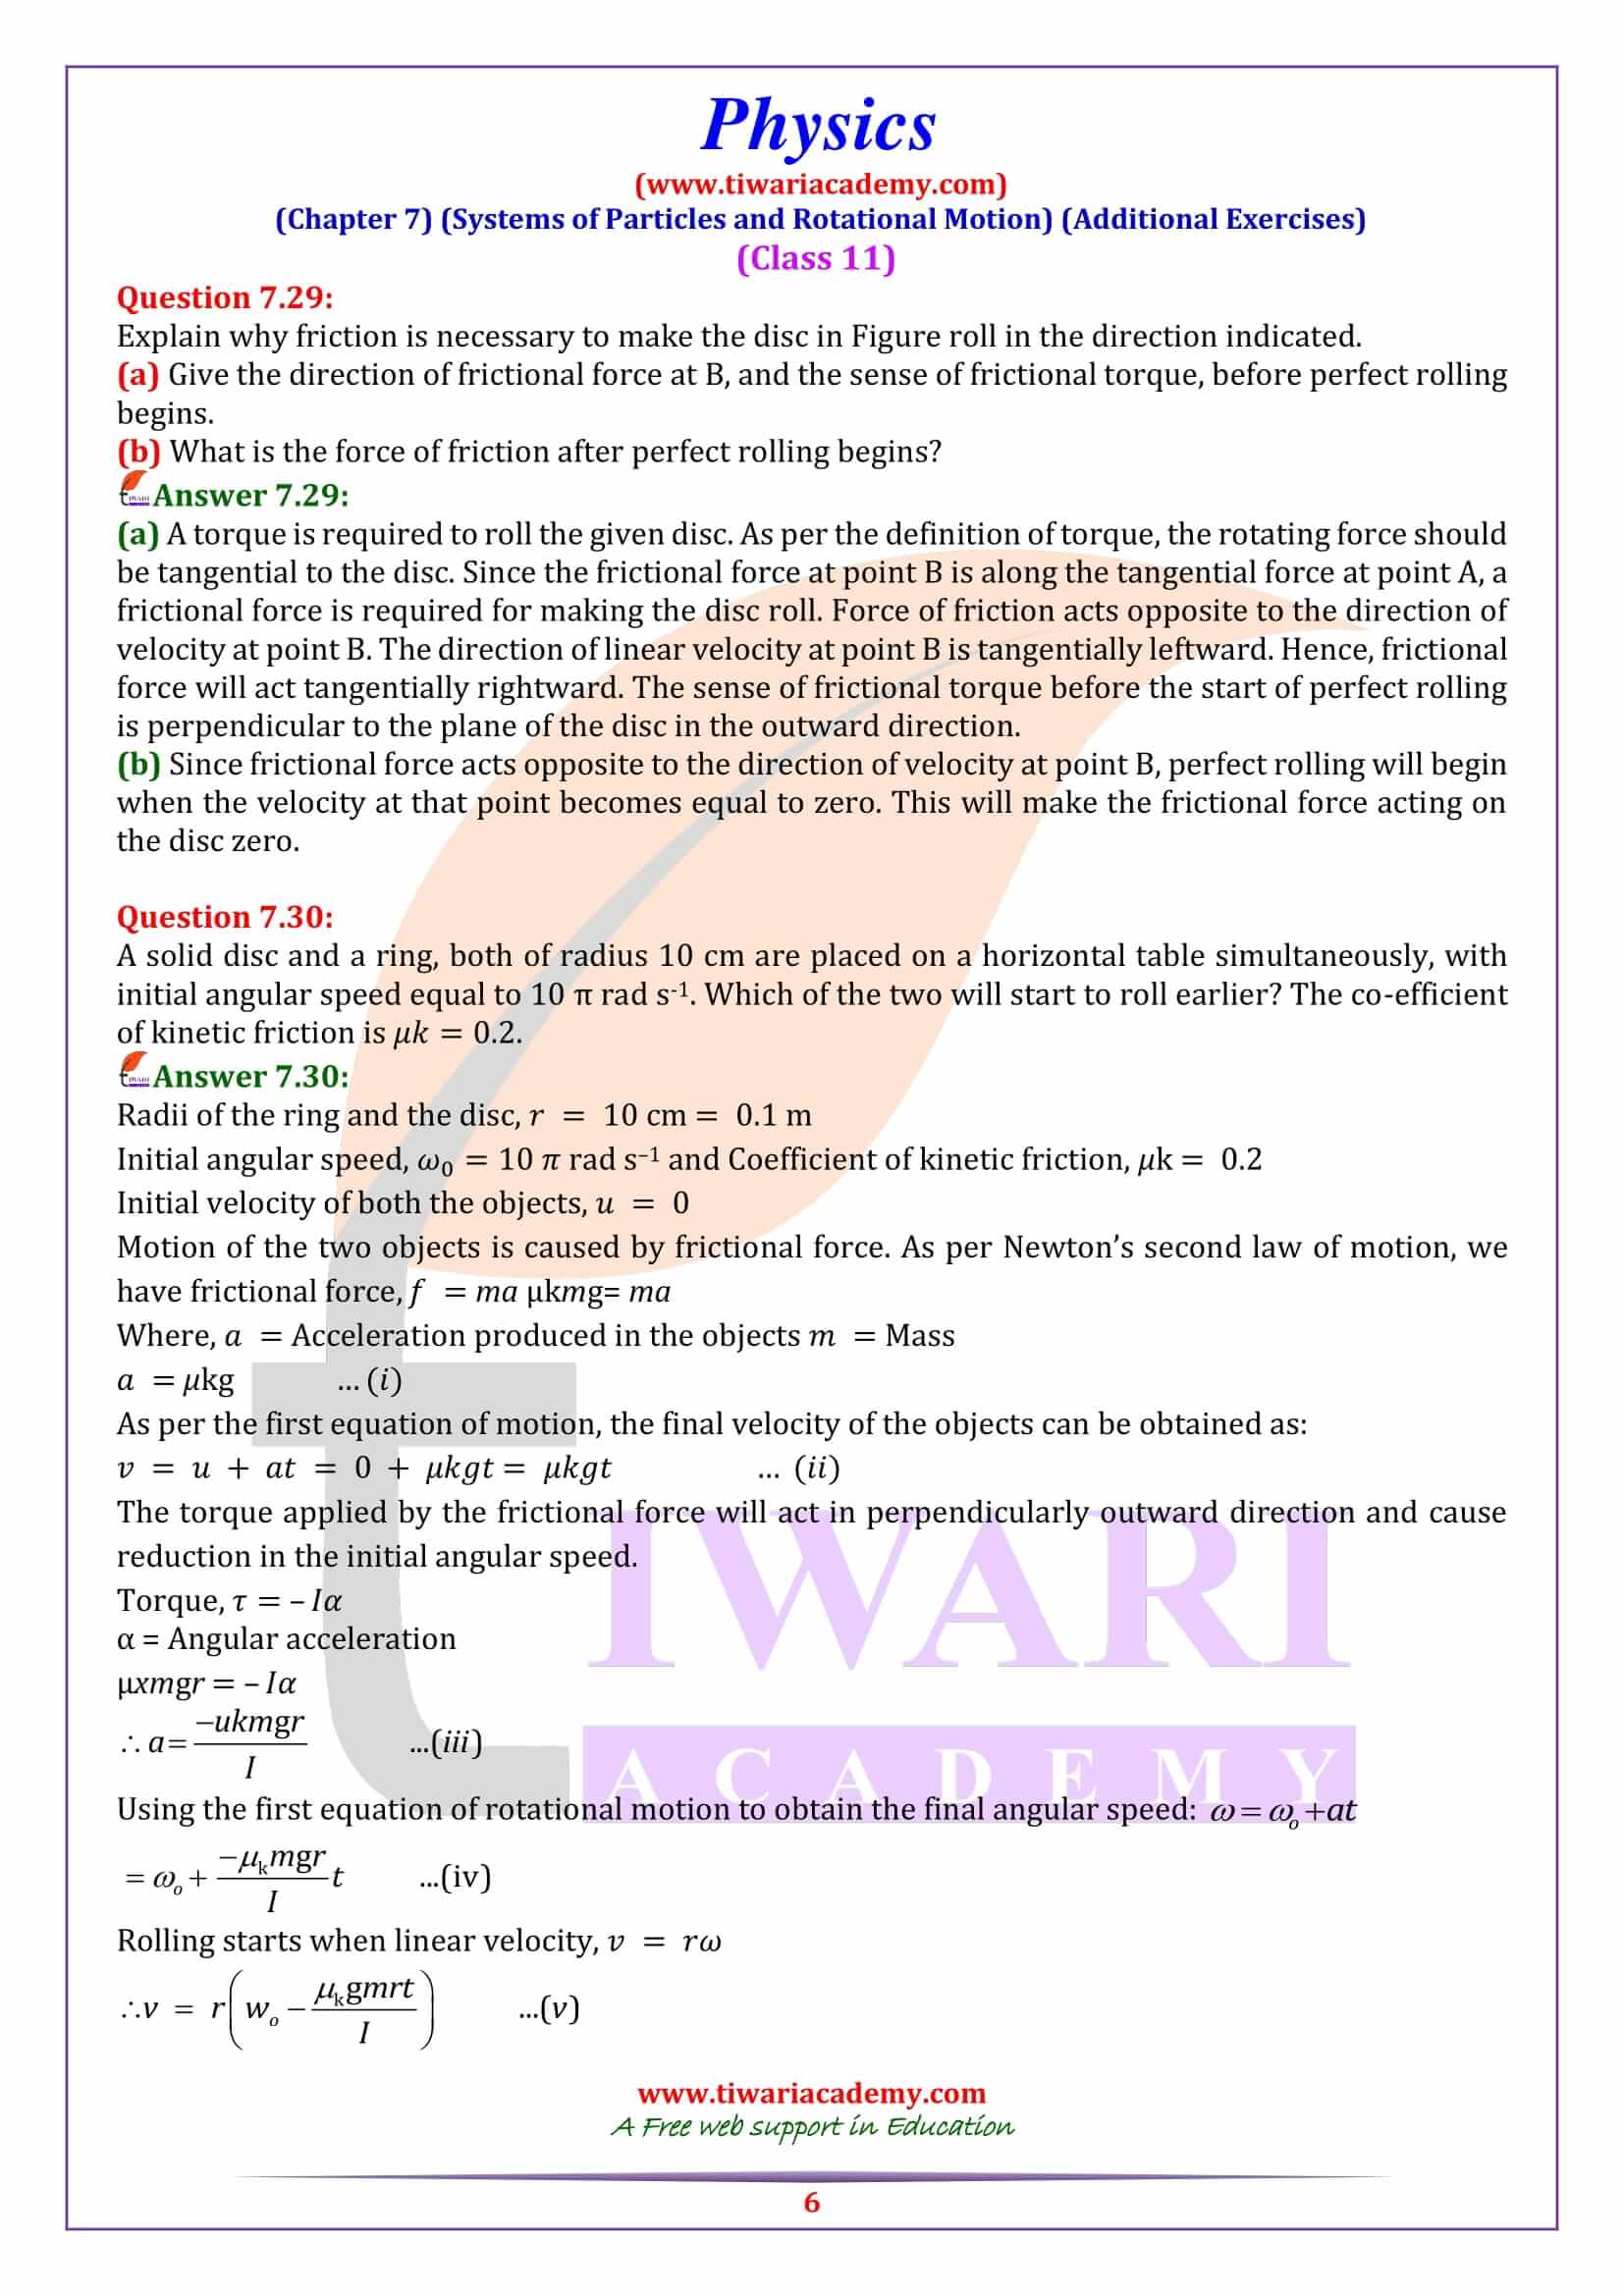 NCERT Solutions for Class 11 Physics Chapter 7 Additional Exercises